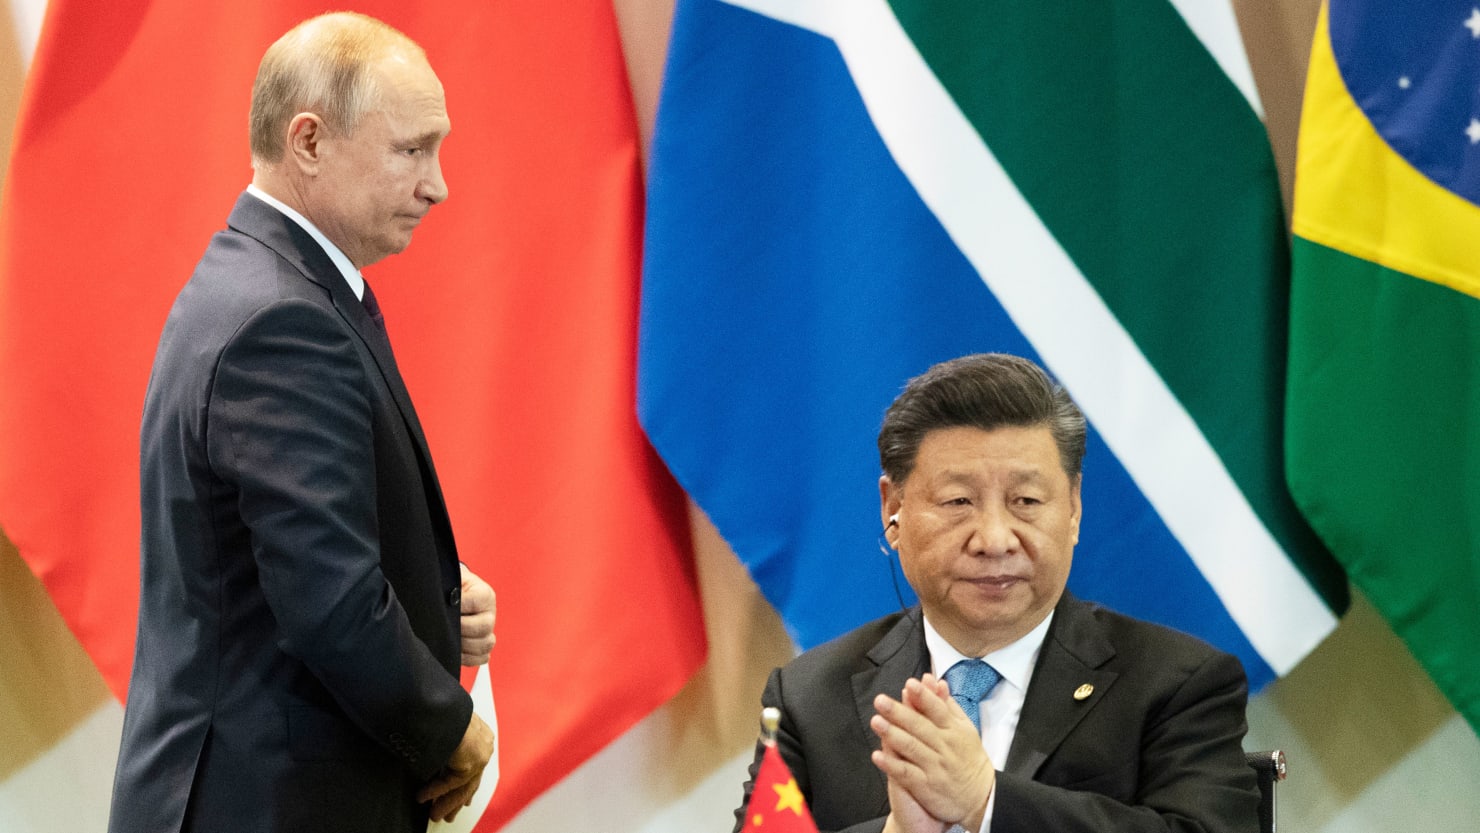 Russia, China collaborate on insane US COVID lab theory